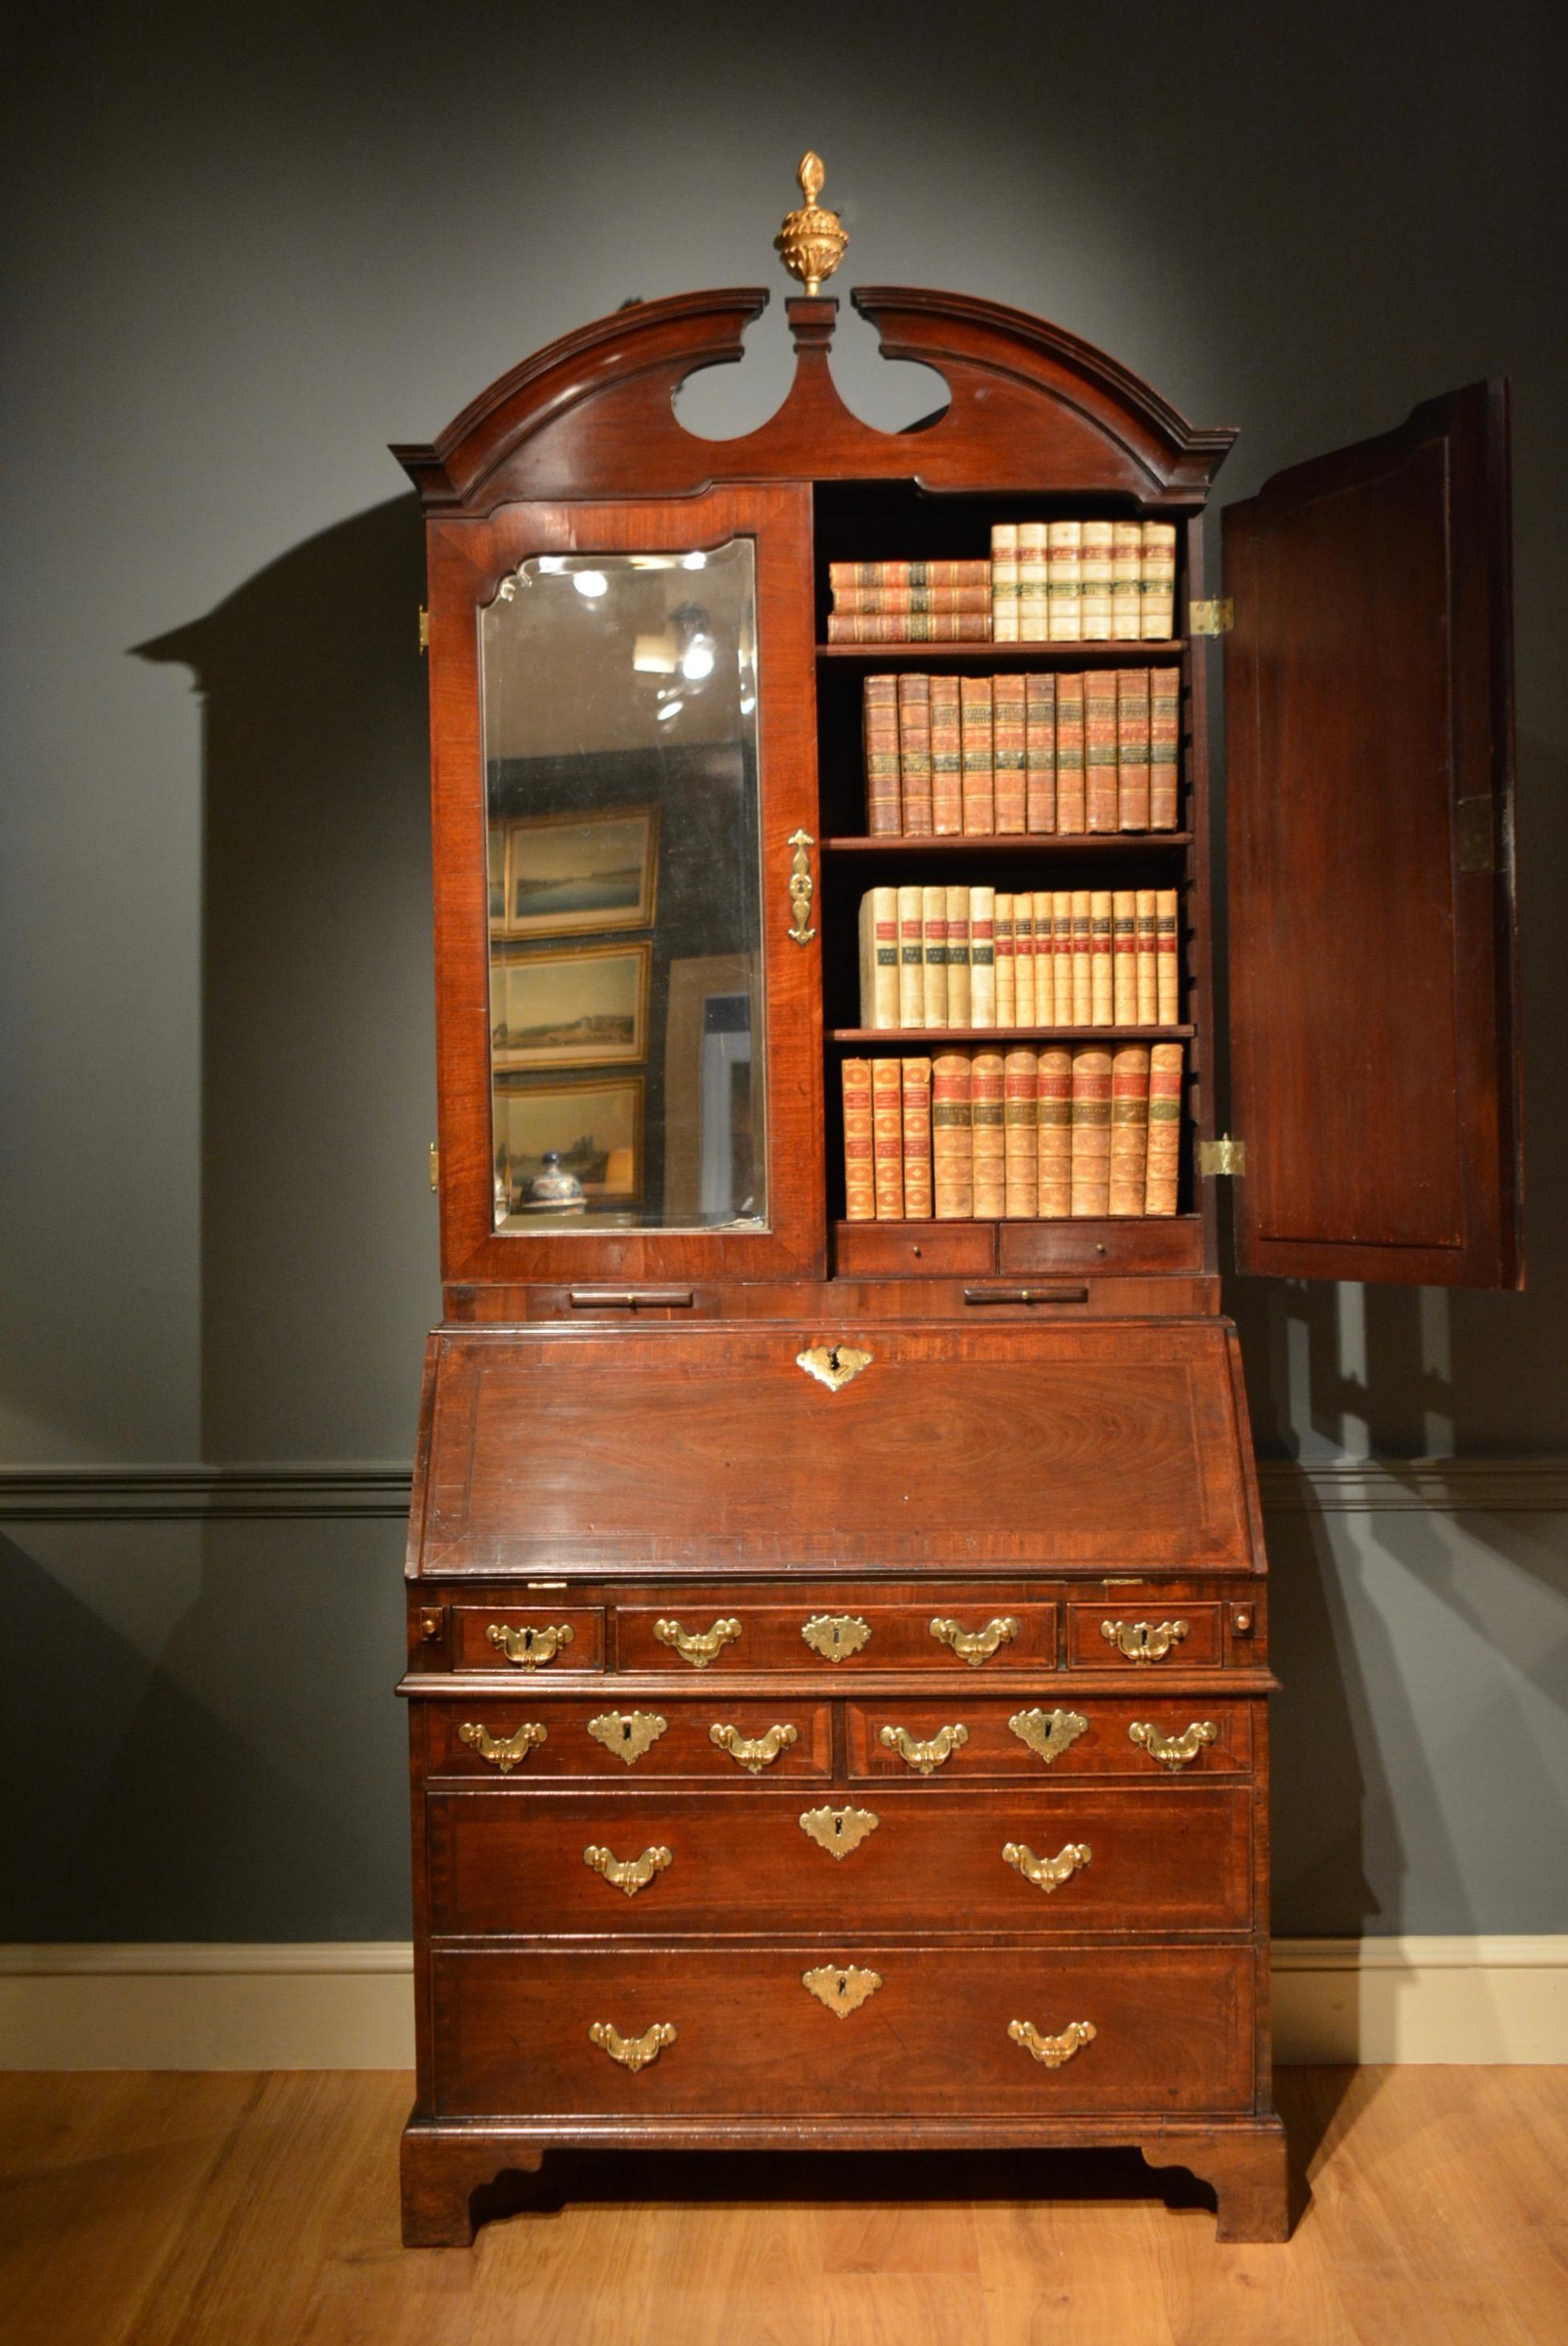 A George II mahogany bureau bookcase, the strongly arched broken pediment centred by a carved gilt finial above a pair of mirrored doors, enclosing adjustable shelves above a bank of small drawers. The fall below opening to reveal a well fitted